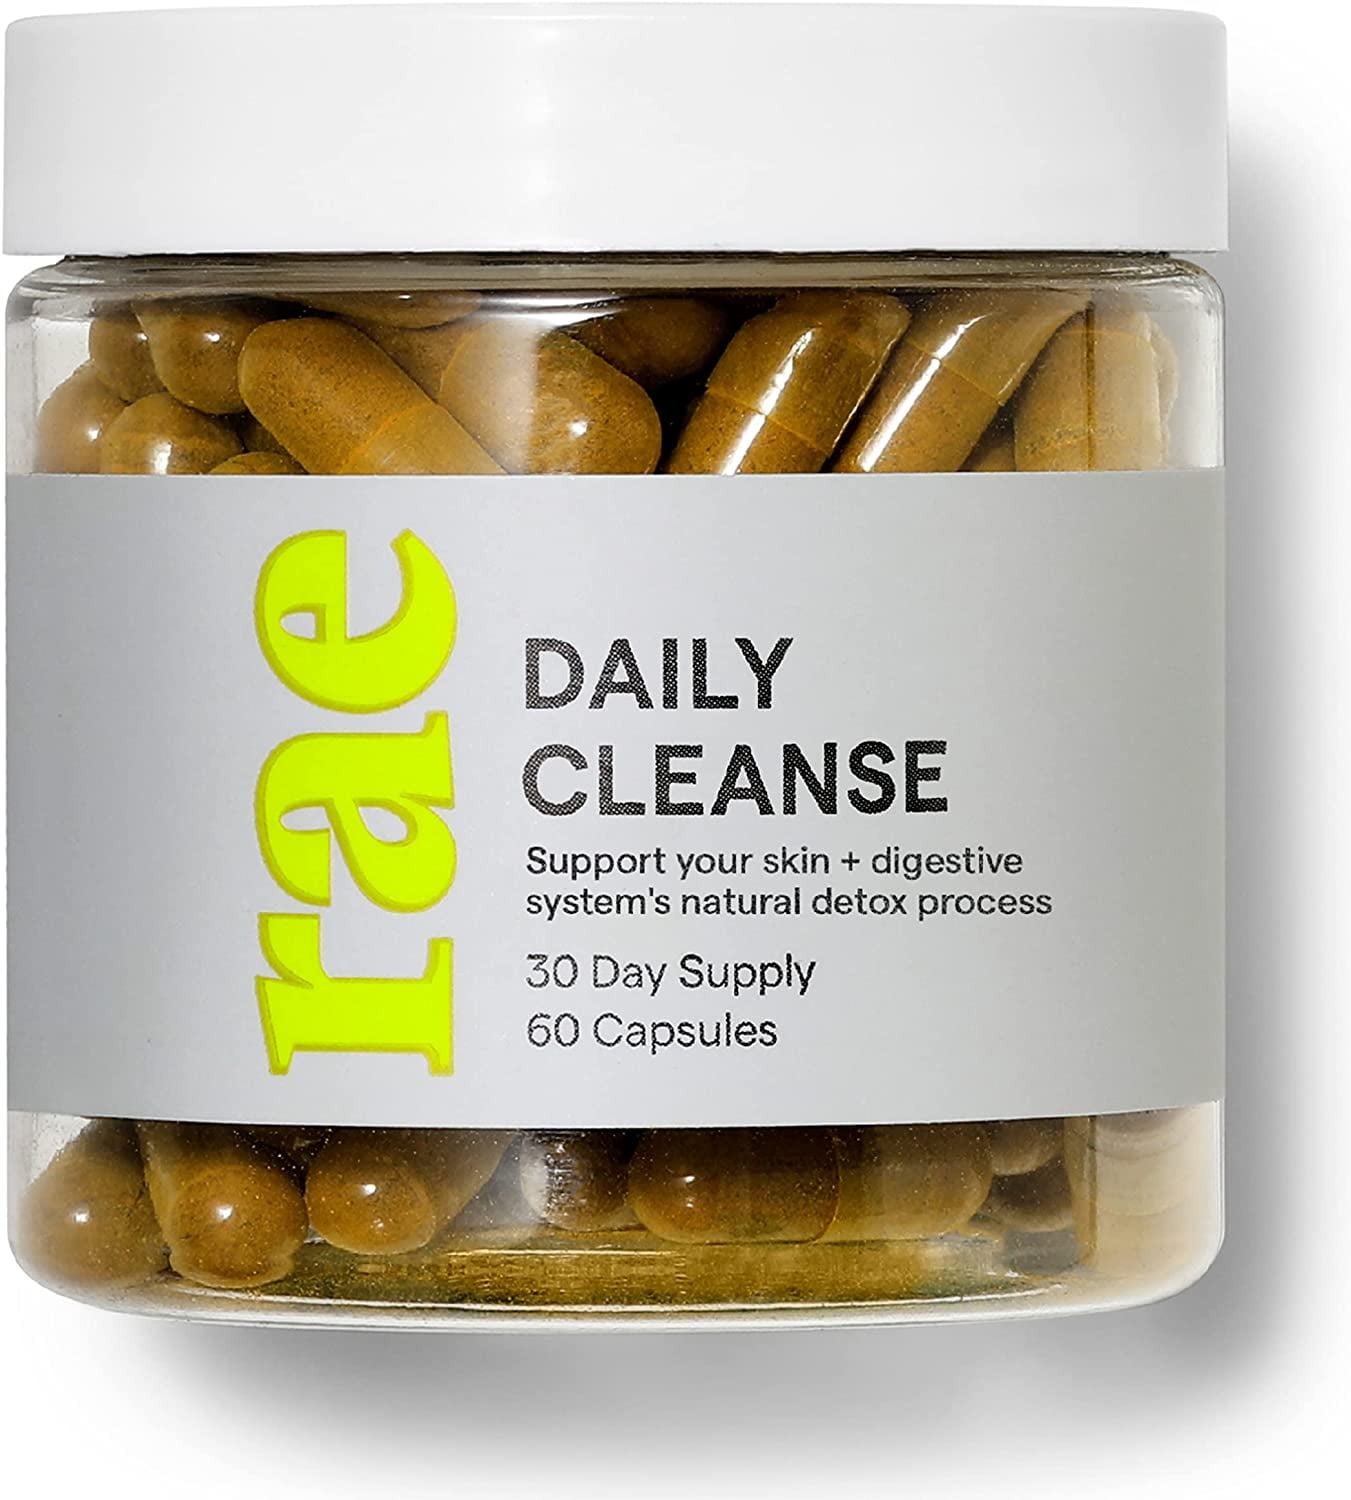 Rae Wellness Daily Cleanse Supplement, For Skin and Digestive System, 60 Capsules